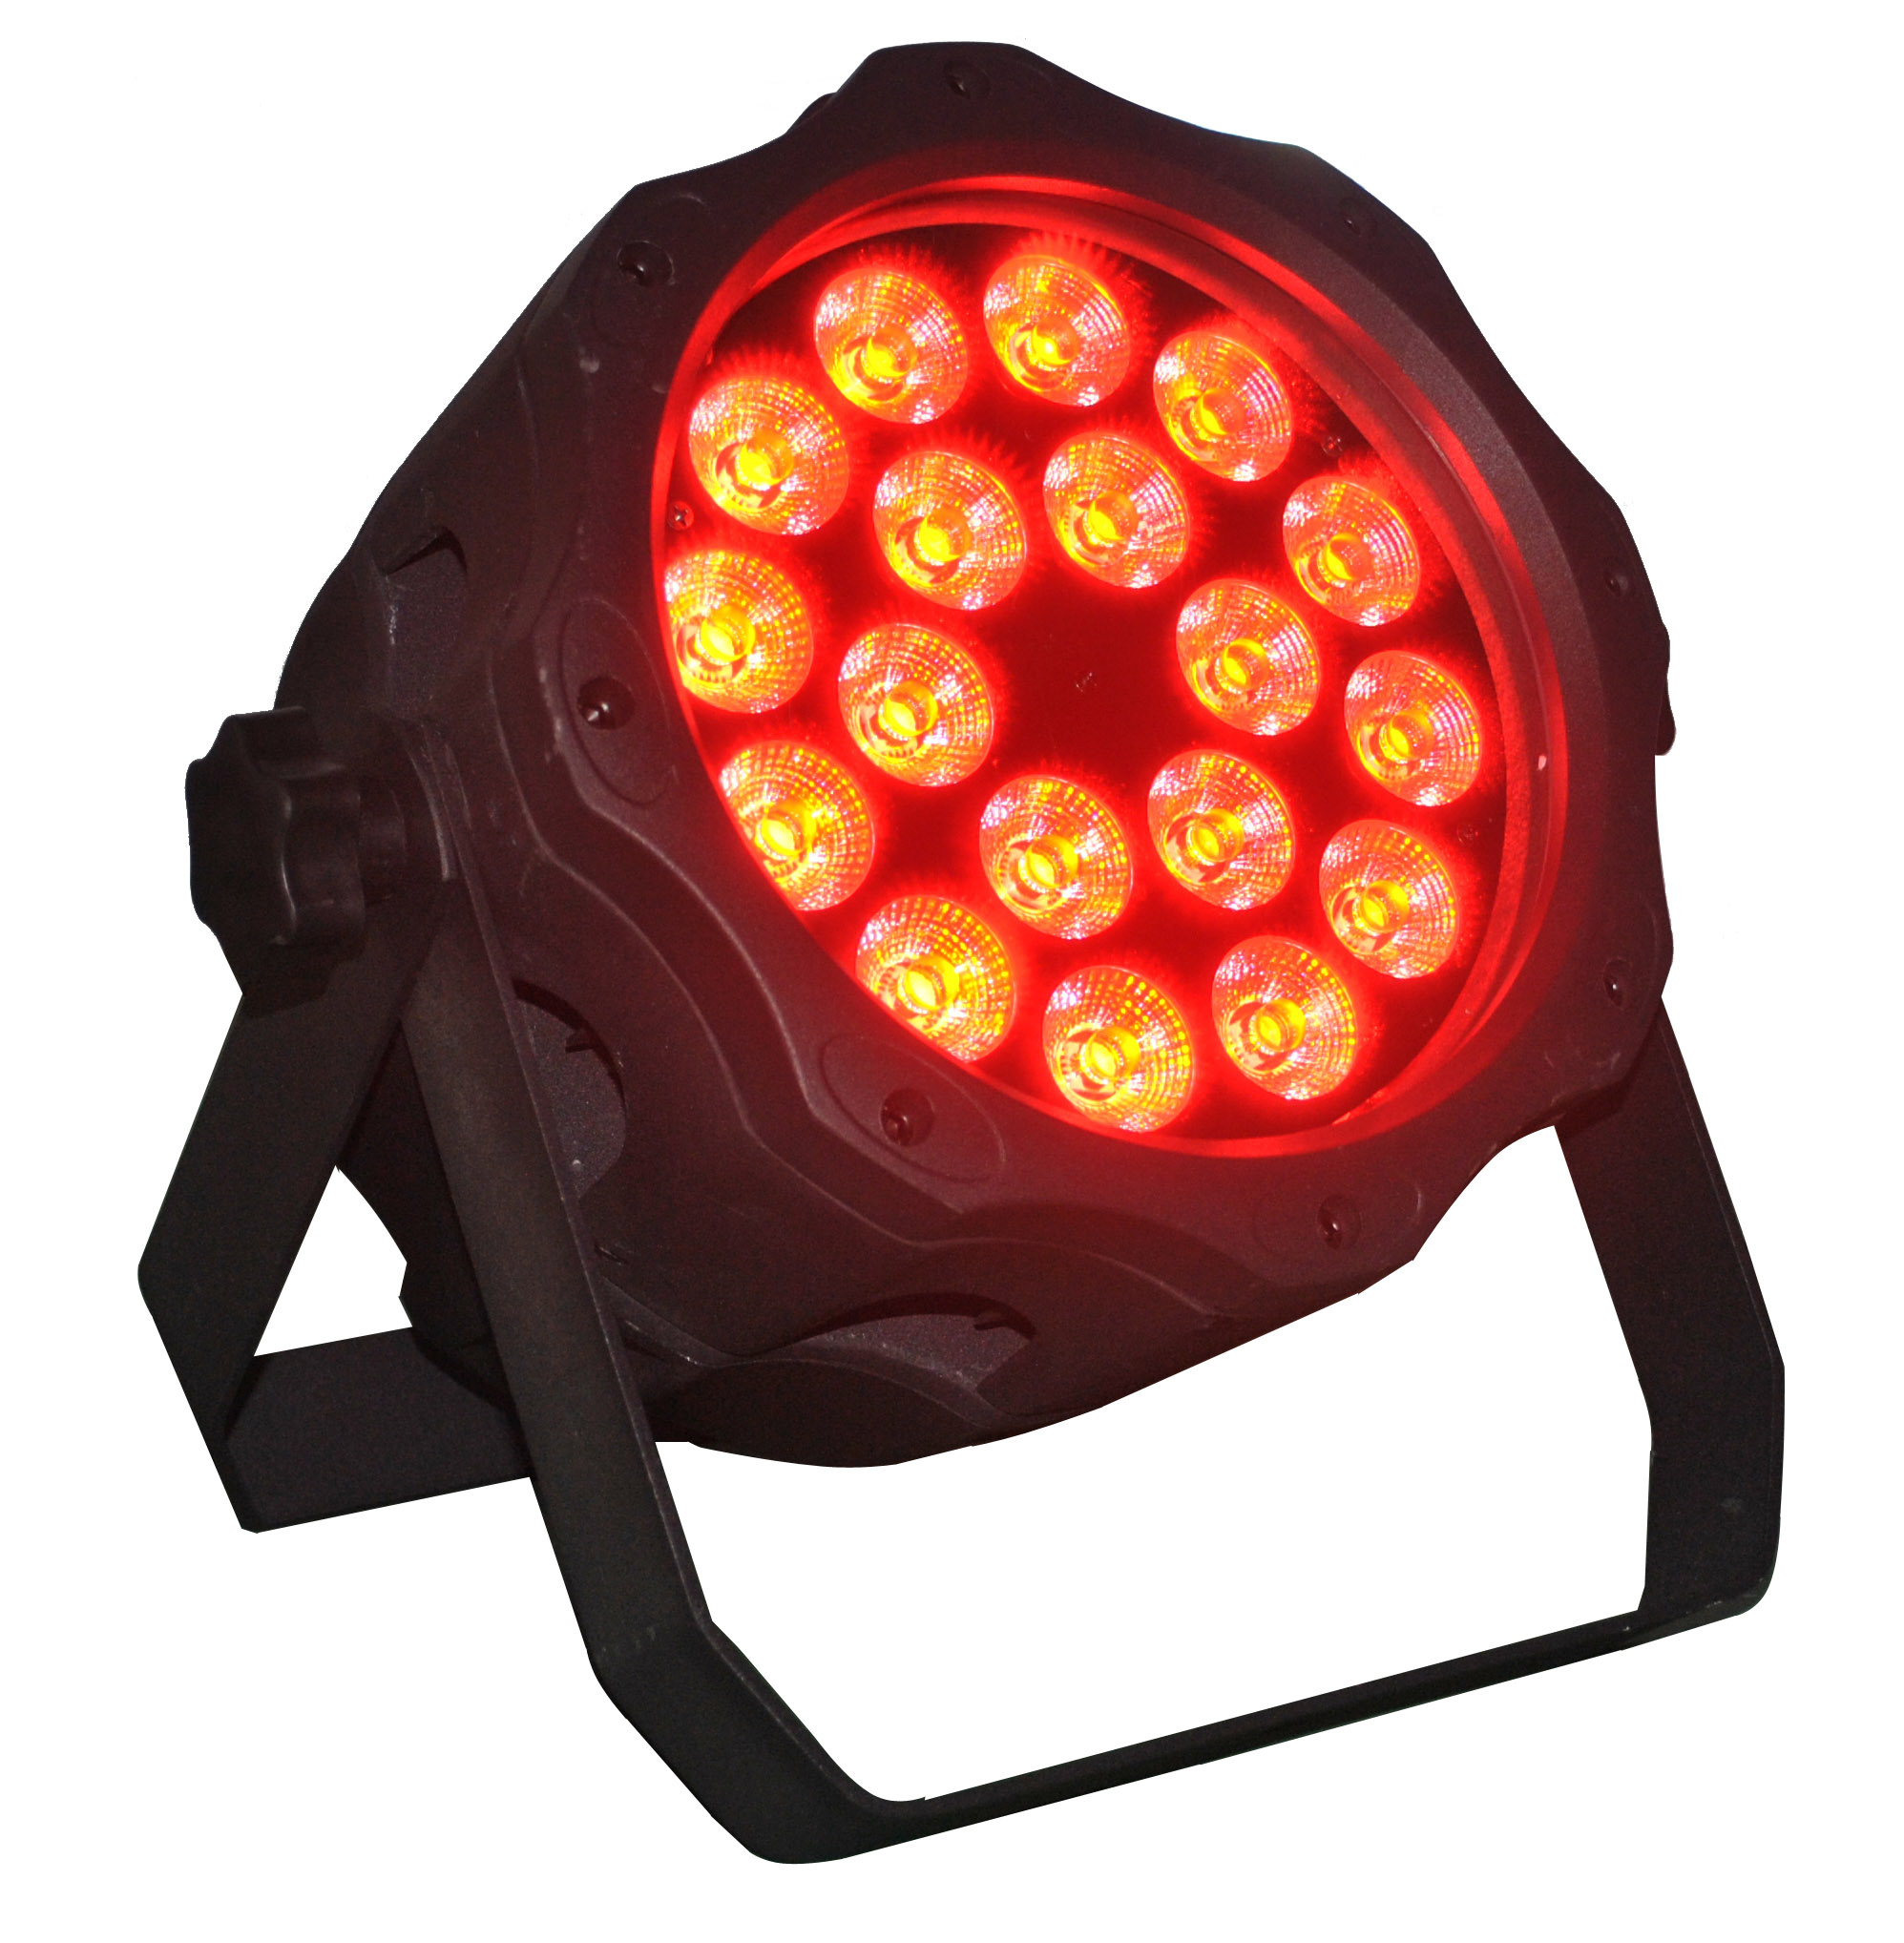 Outdoor 18X18W 6in1 Led Par Can Light HS-P64-1818Out - Led stage light - 6